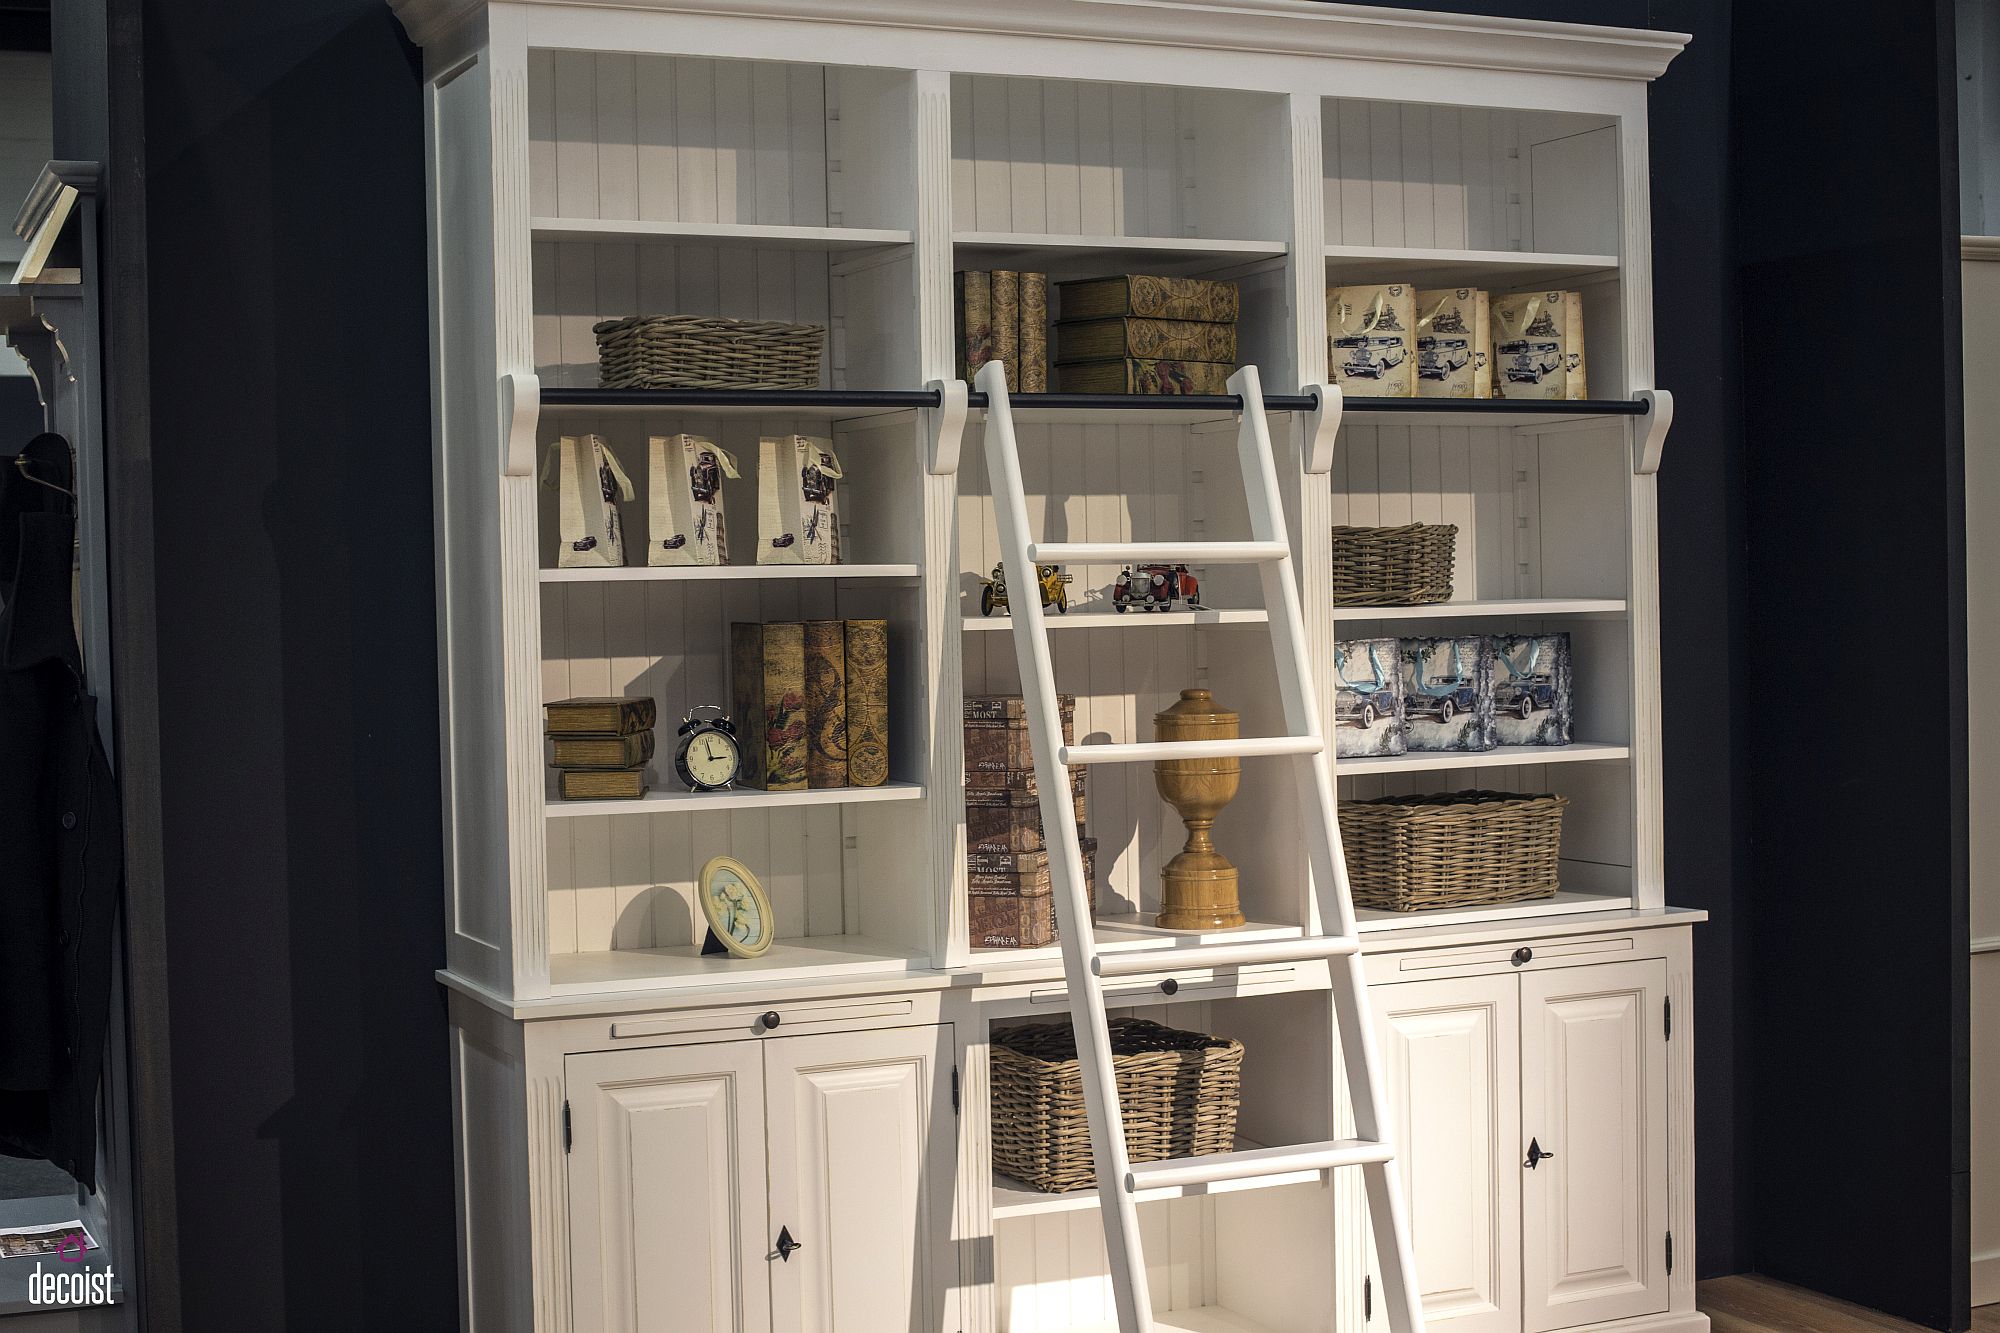 Dining-room-hutch-provides-both-storage-and-display-space